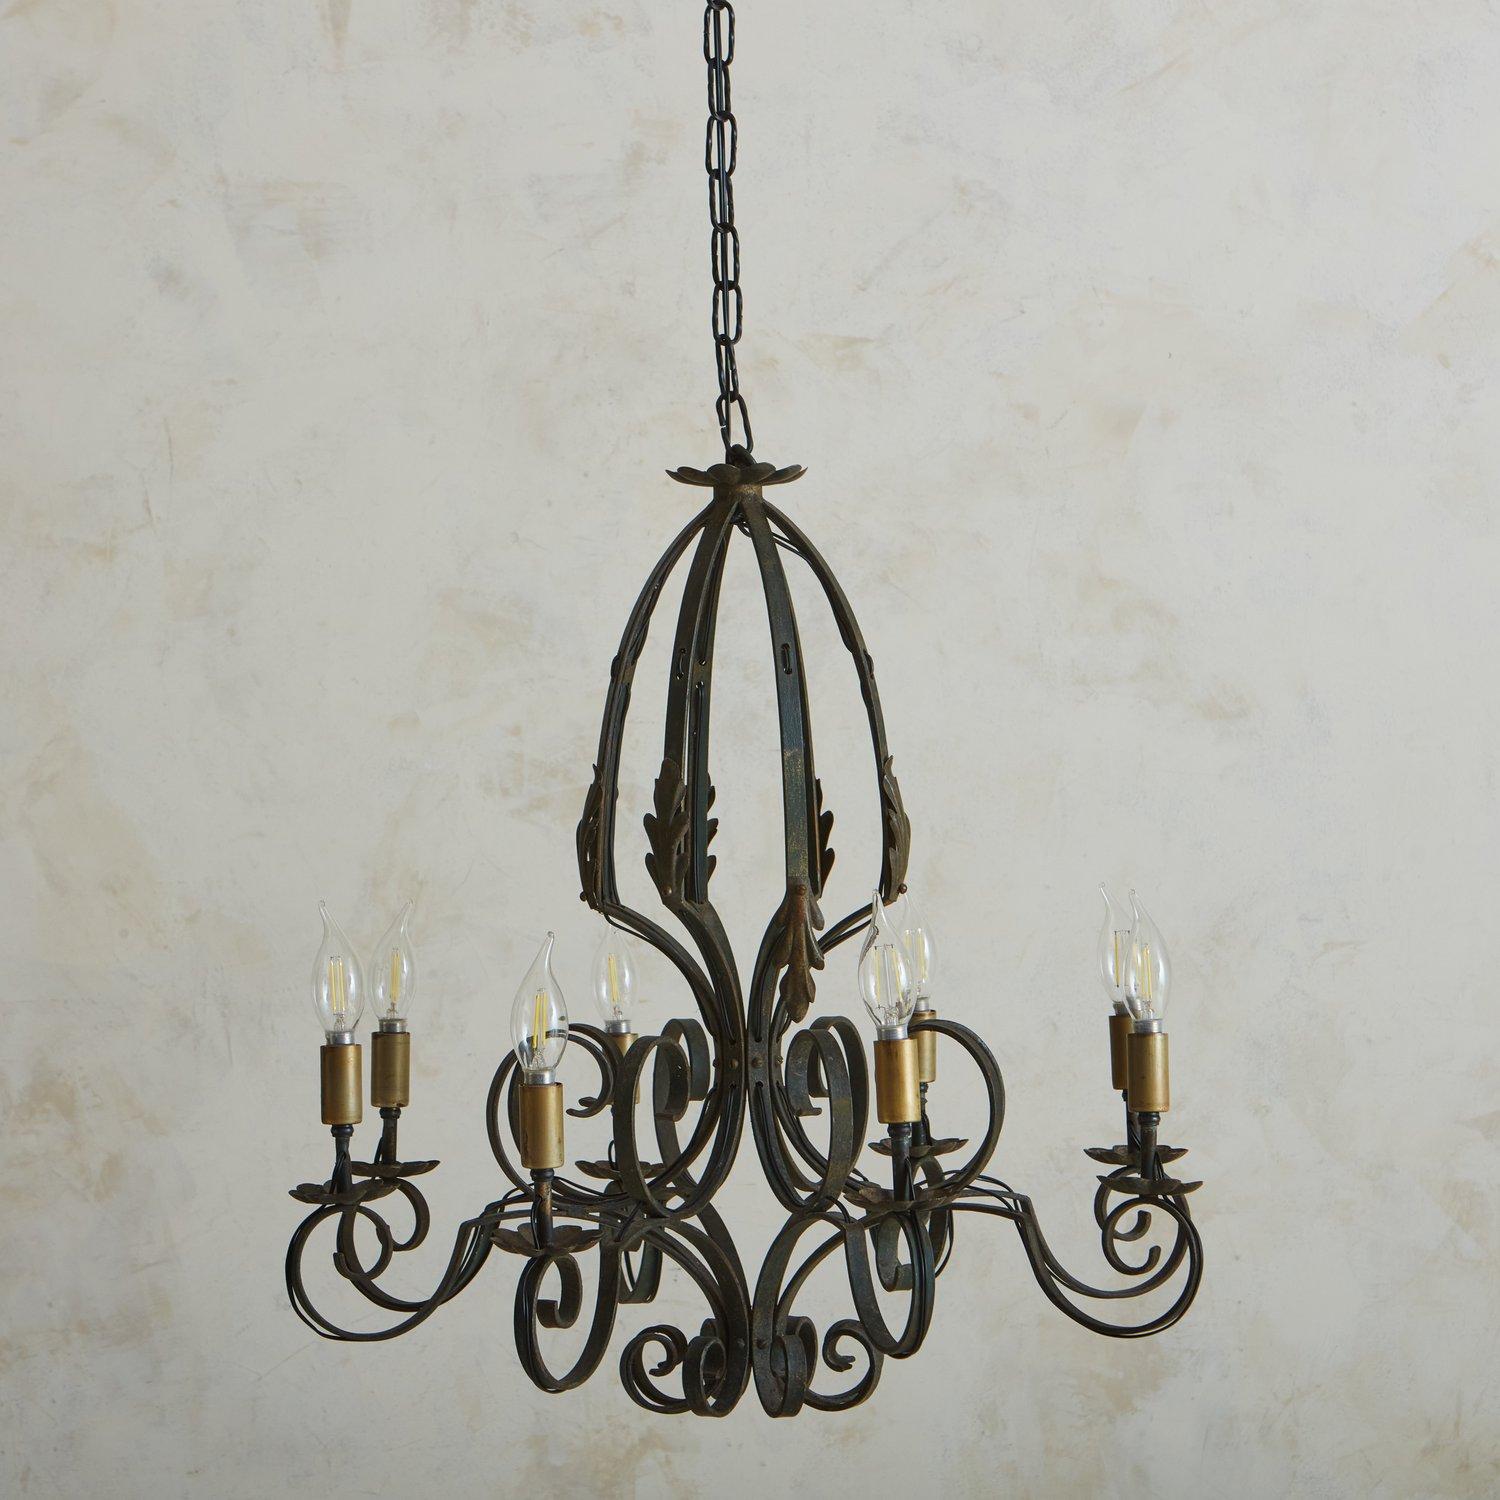 A 1920s French patinated iron chandelier with curved detailing. This chandelier has eight scalloped bobeches and new antiqued brass socket covers, which hold candelabra light bulbs. It hangs from a new chain and canopy. We love the scale of this